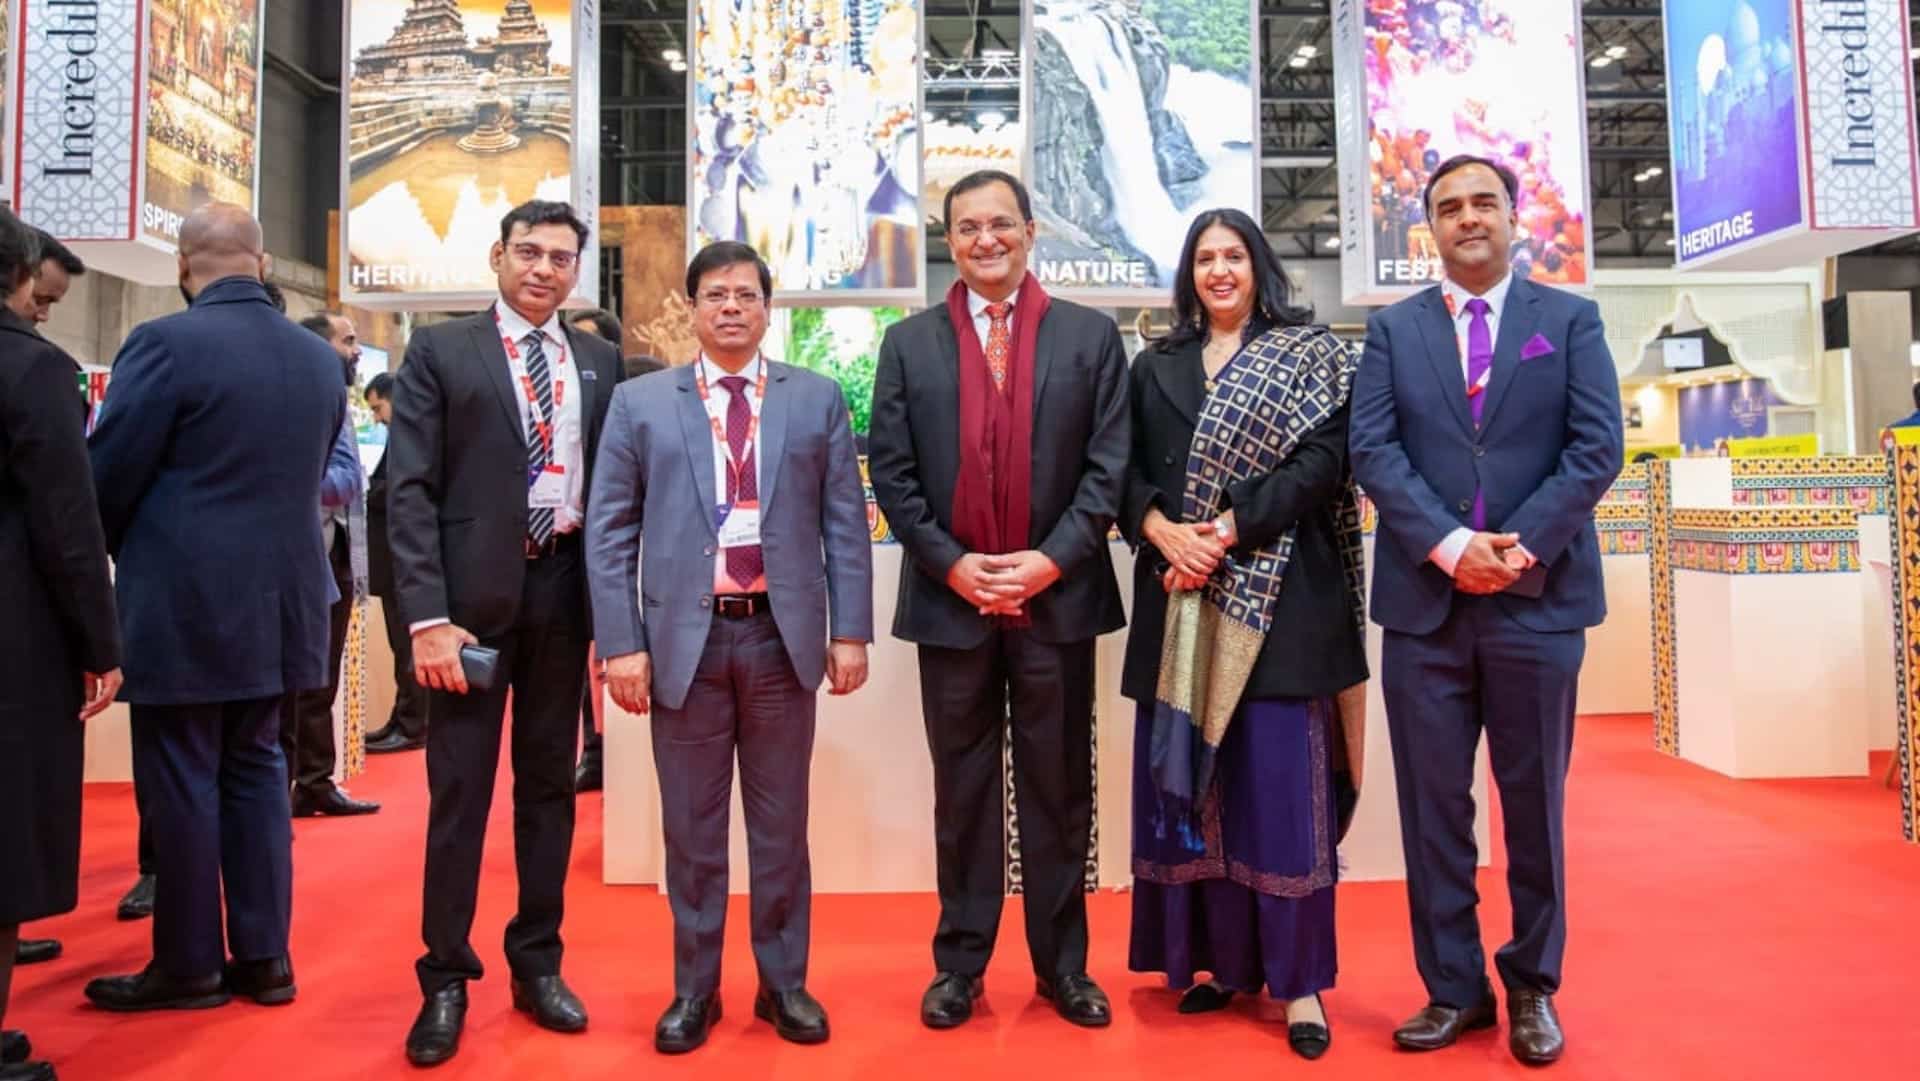 The Ministry of Tourism, Government of India participated in FITUR, one of the world’s largest international tourism trade fairs in Madrid